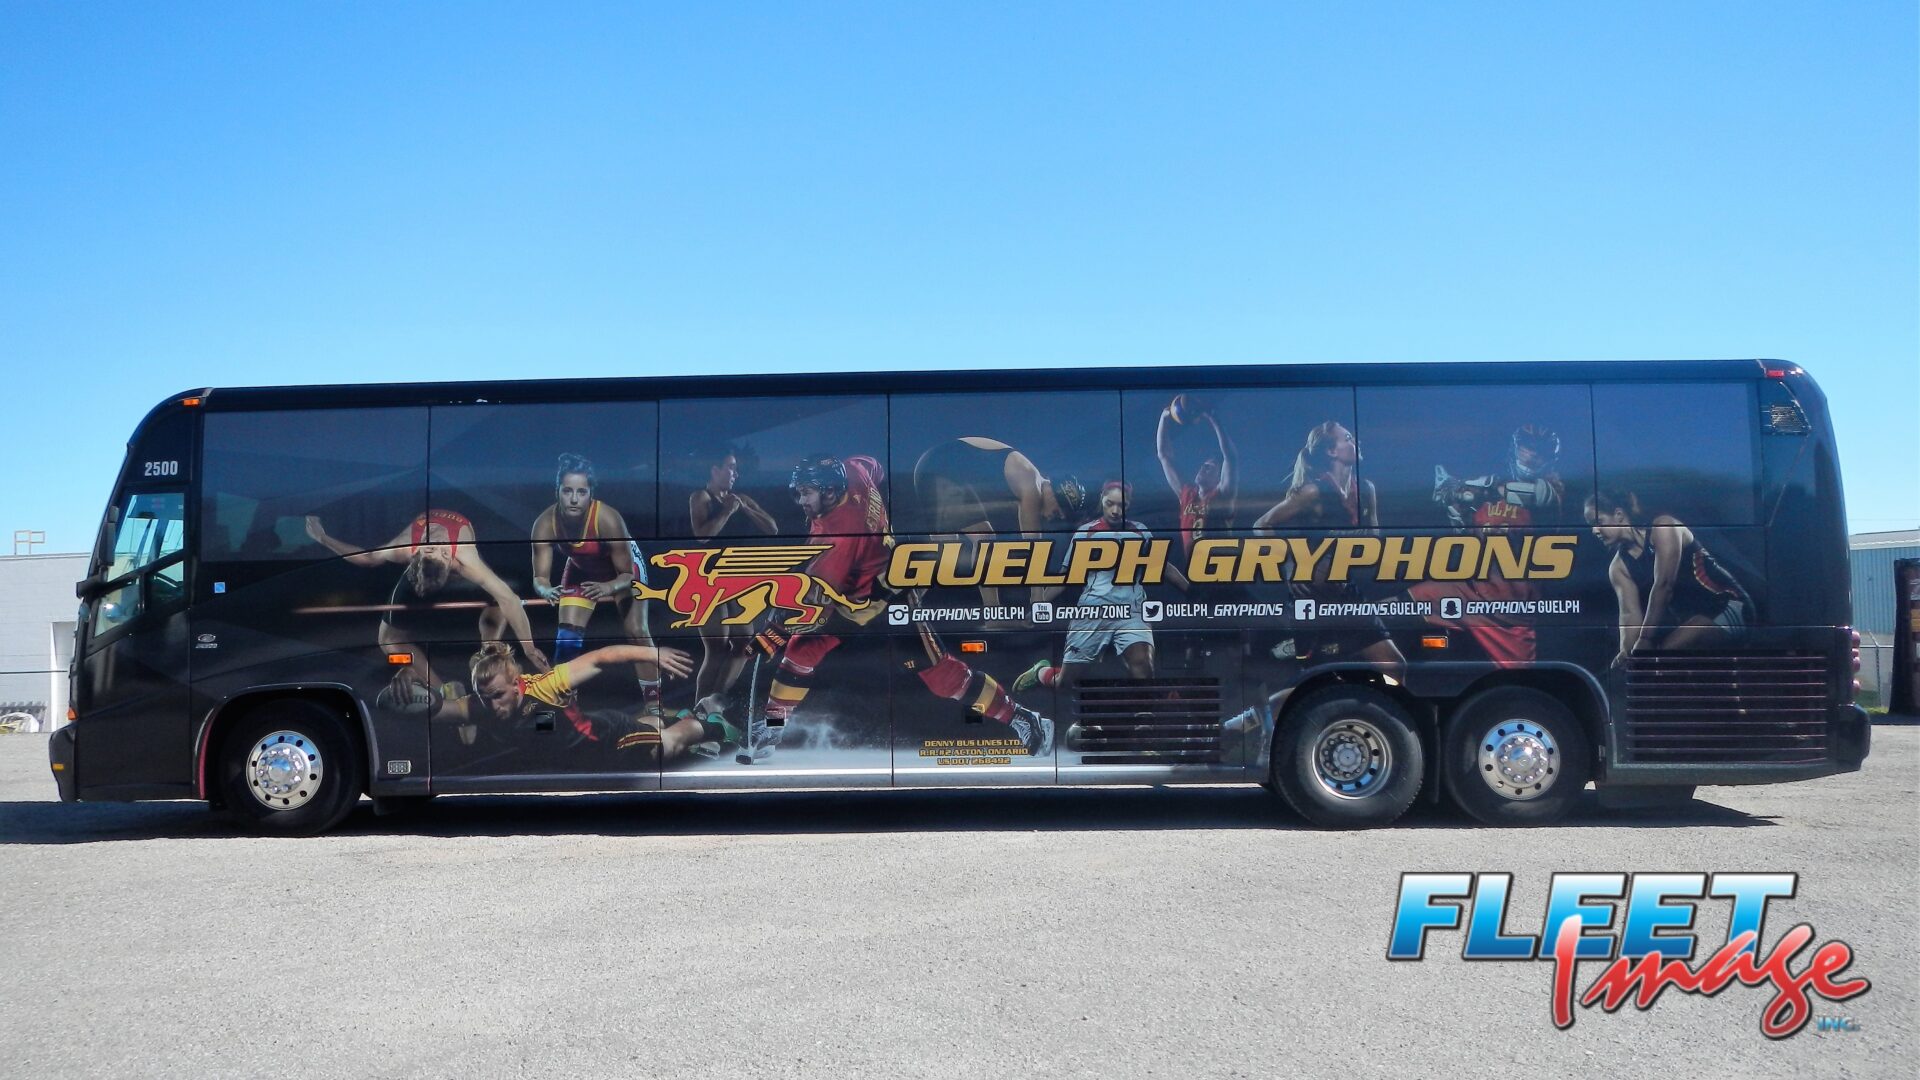 GUELPH GRYPHONS decal sticker on a truck